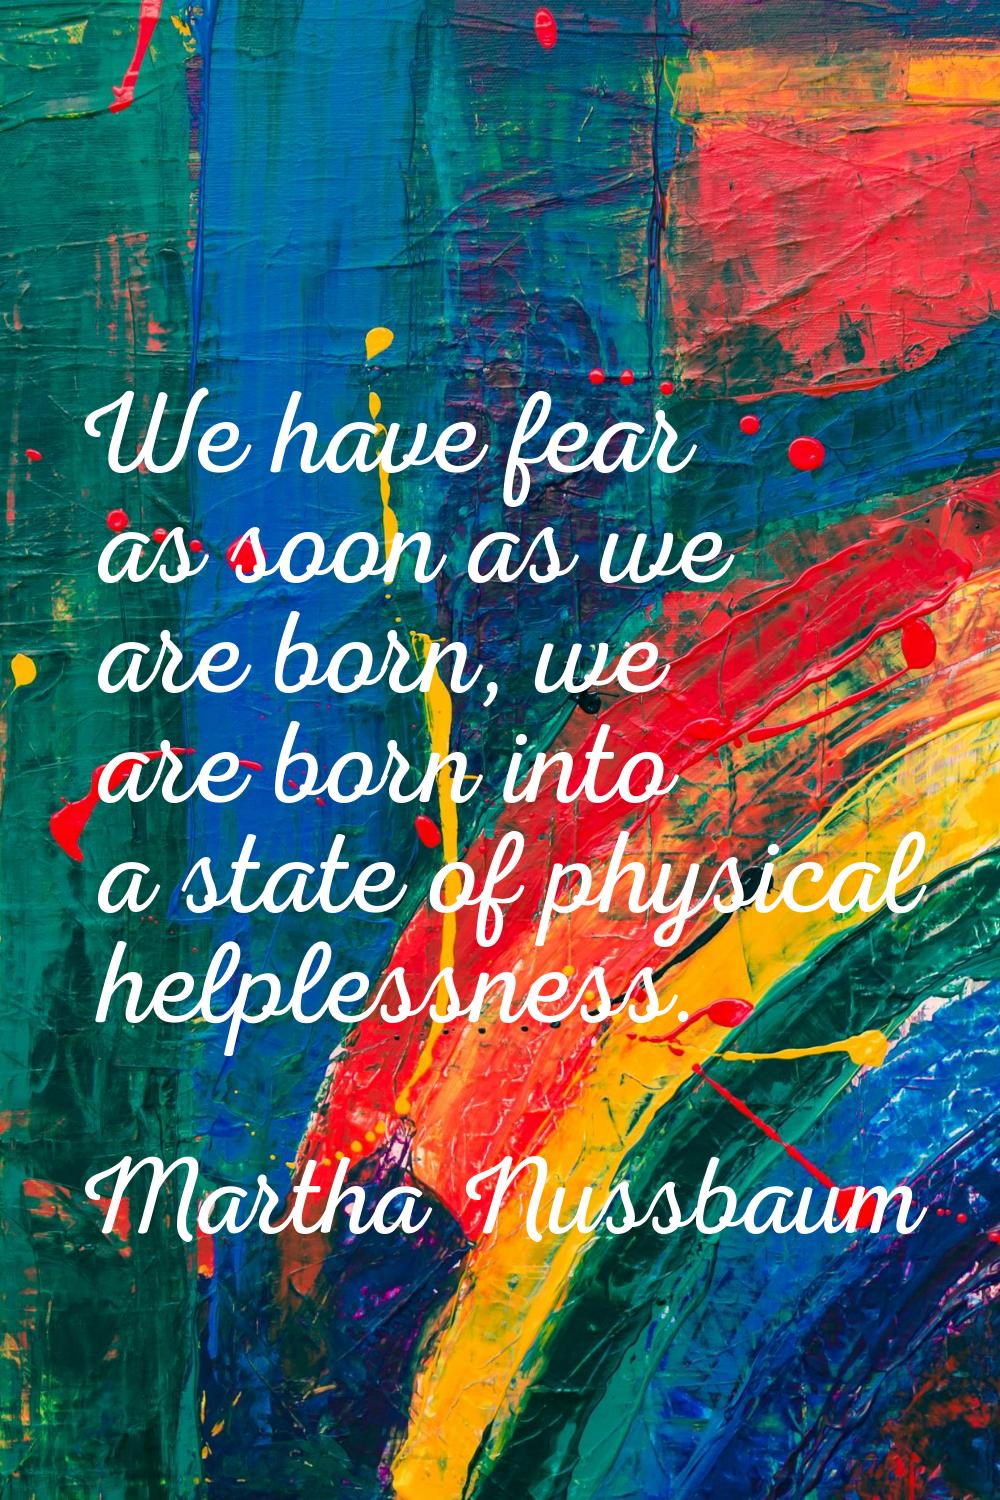 We have fear as soon as we are born, we are born into a state of physical helplessness.